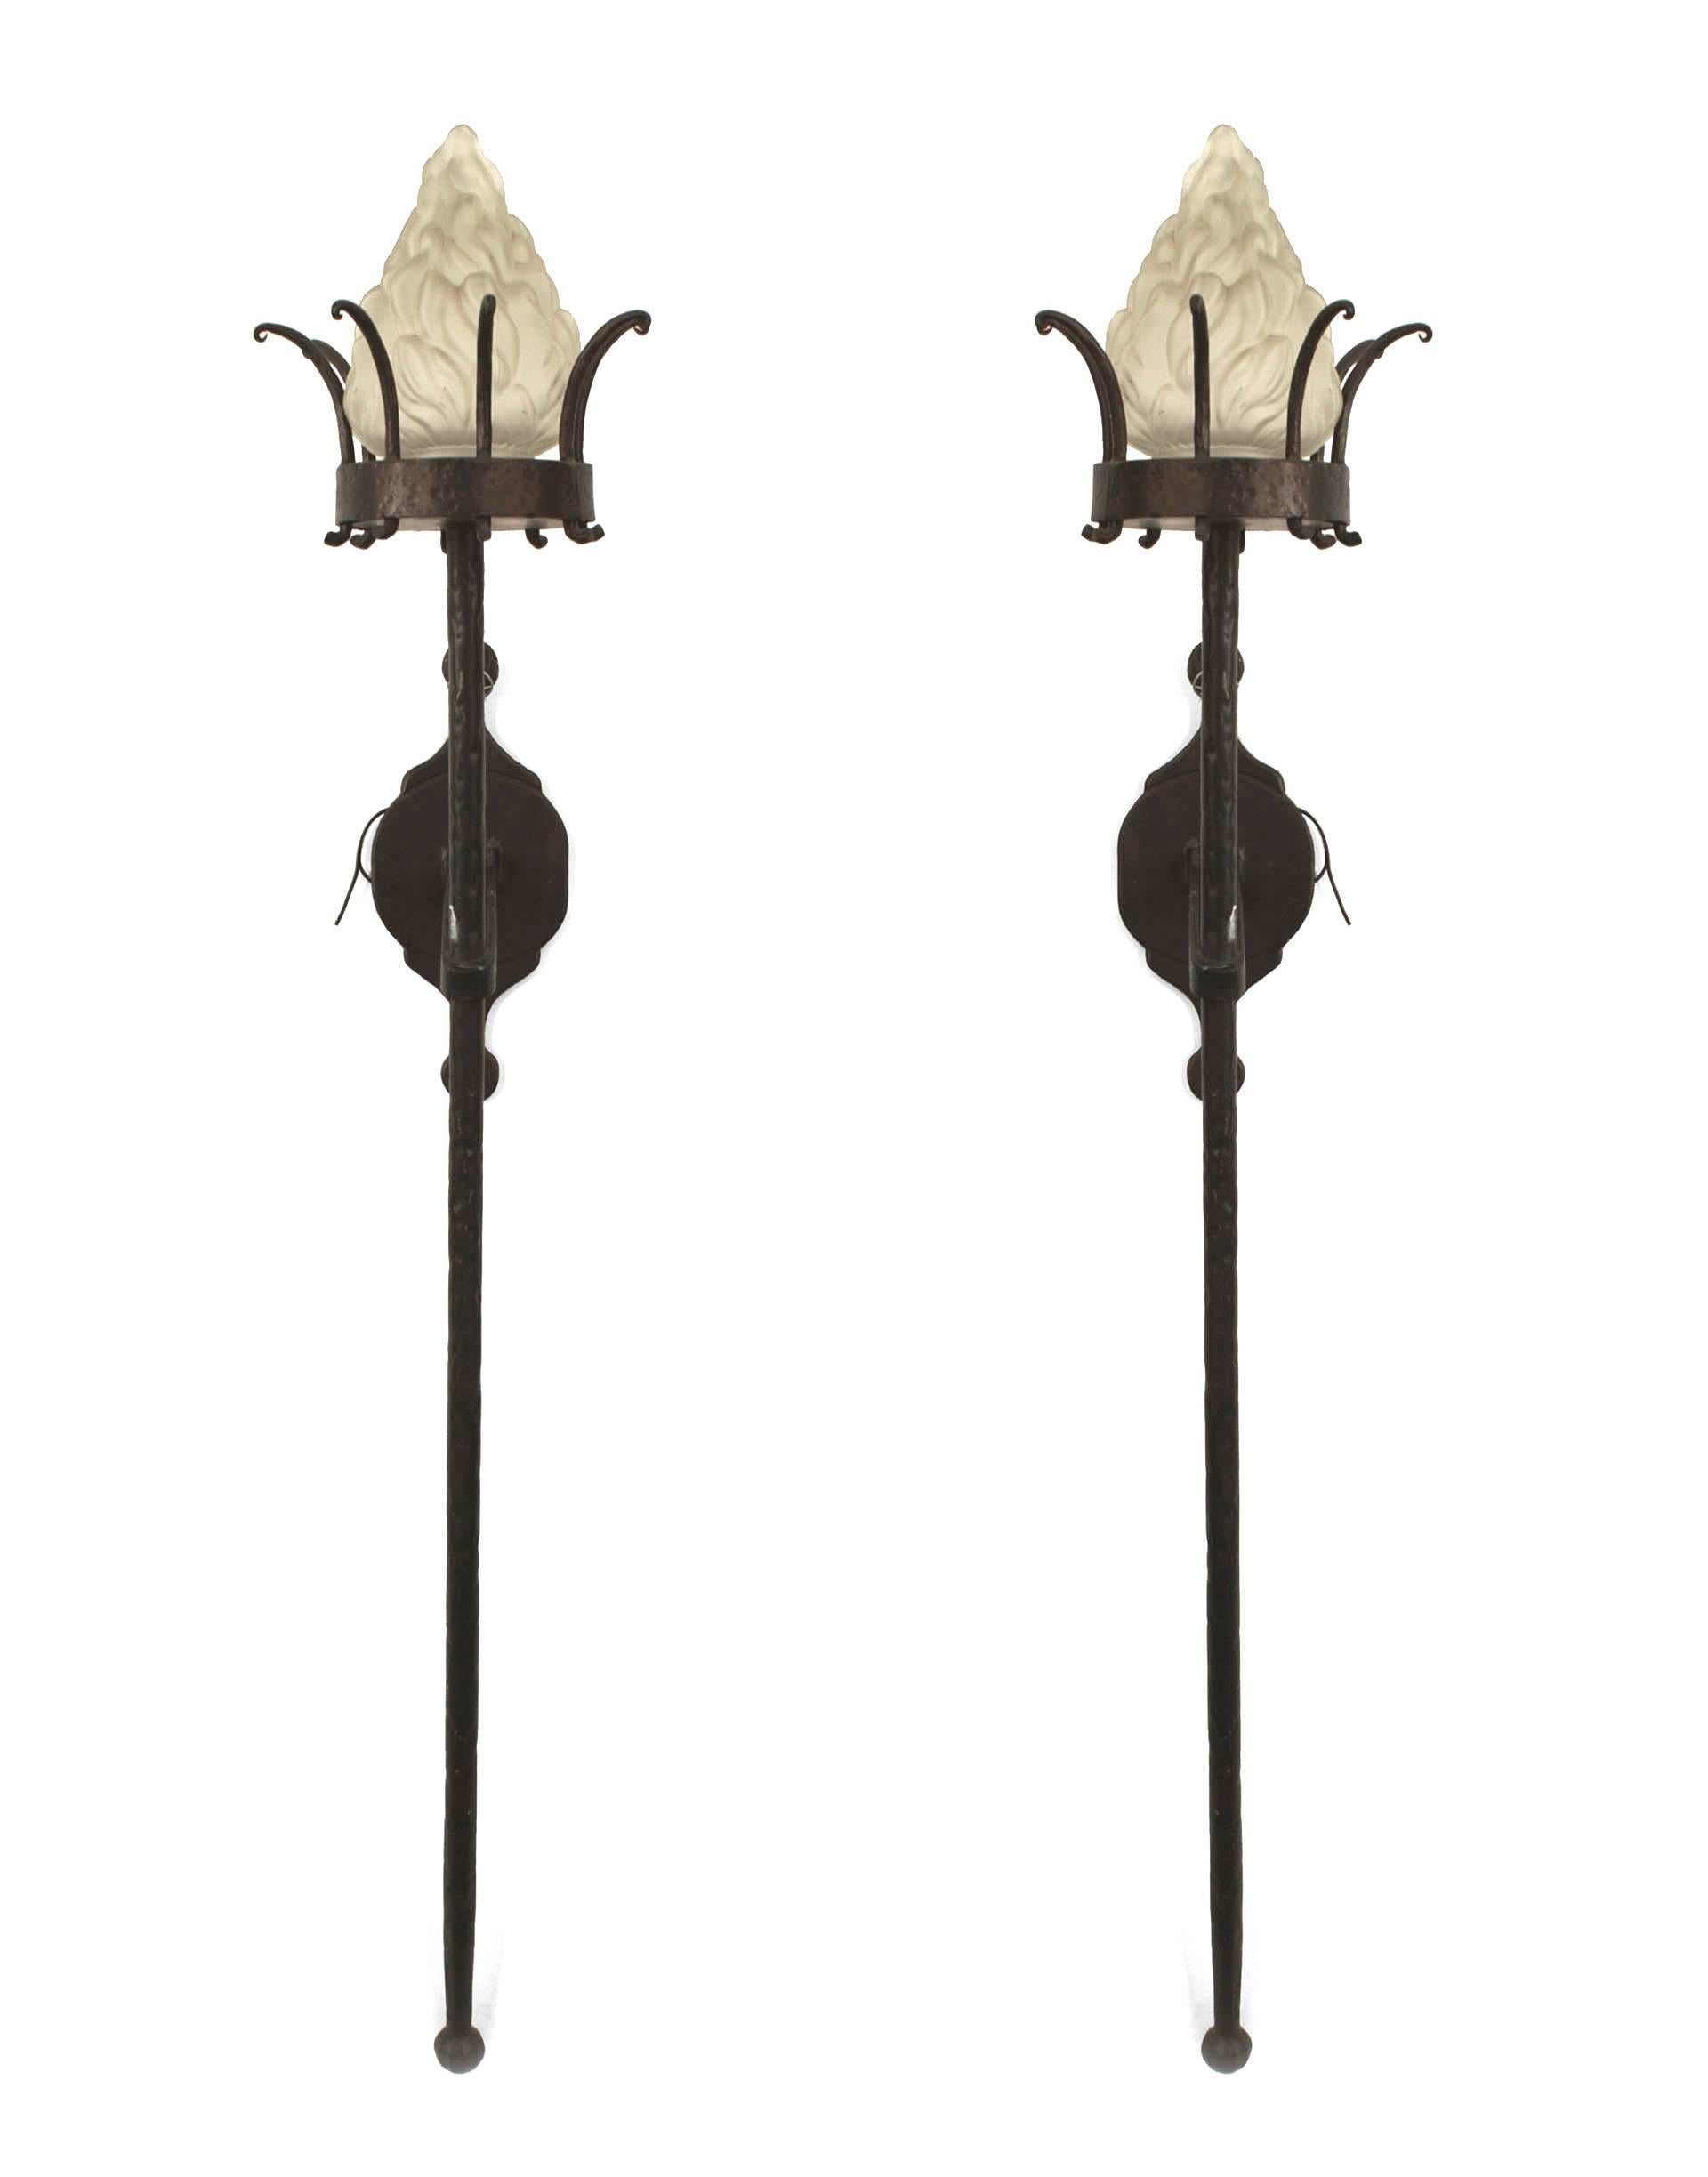 4 Italian Renaissance style (1st half of 20th Century) wrought iron large wall sconces with a long pole ending in a glass flame shaped shade (PRICED EACH)
